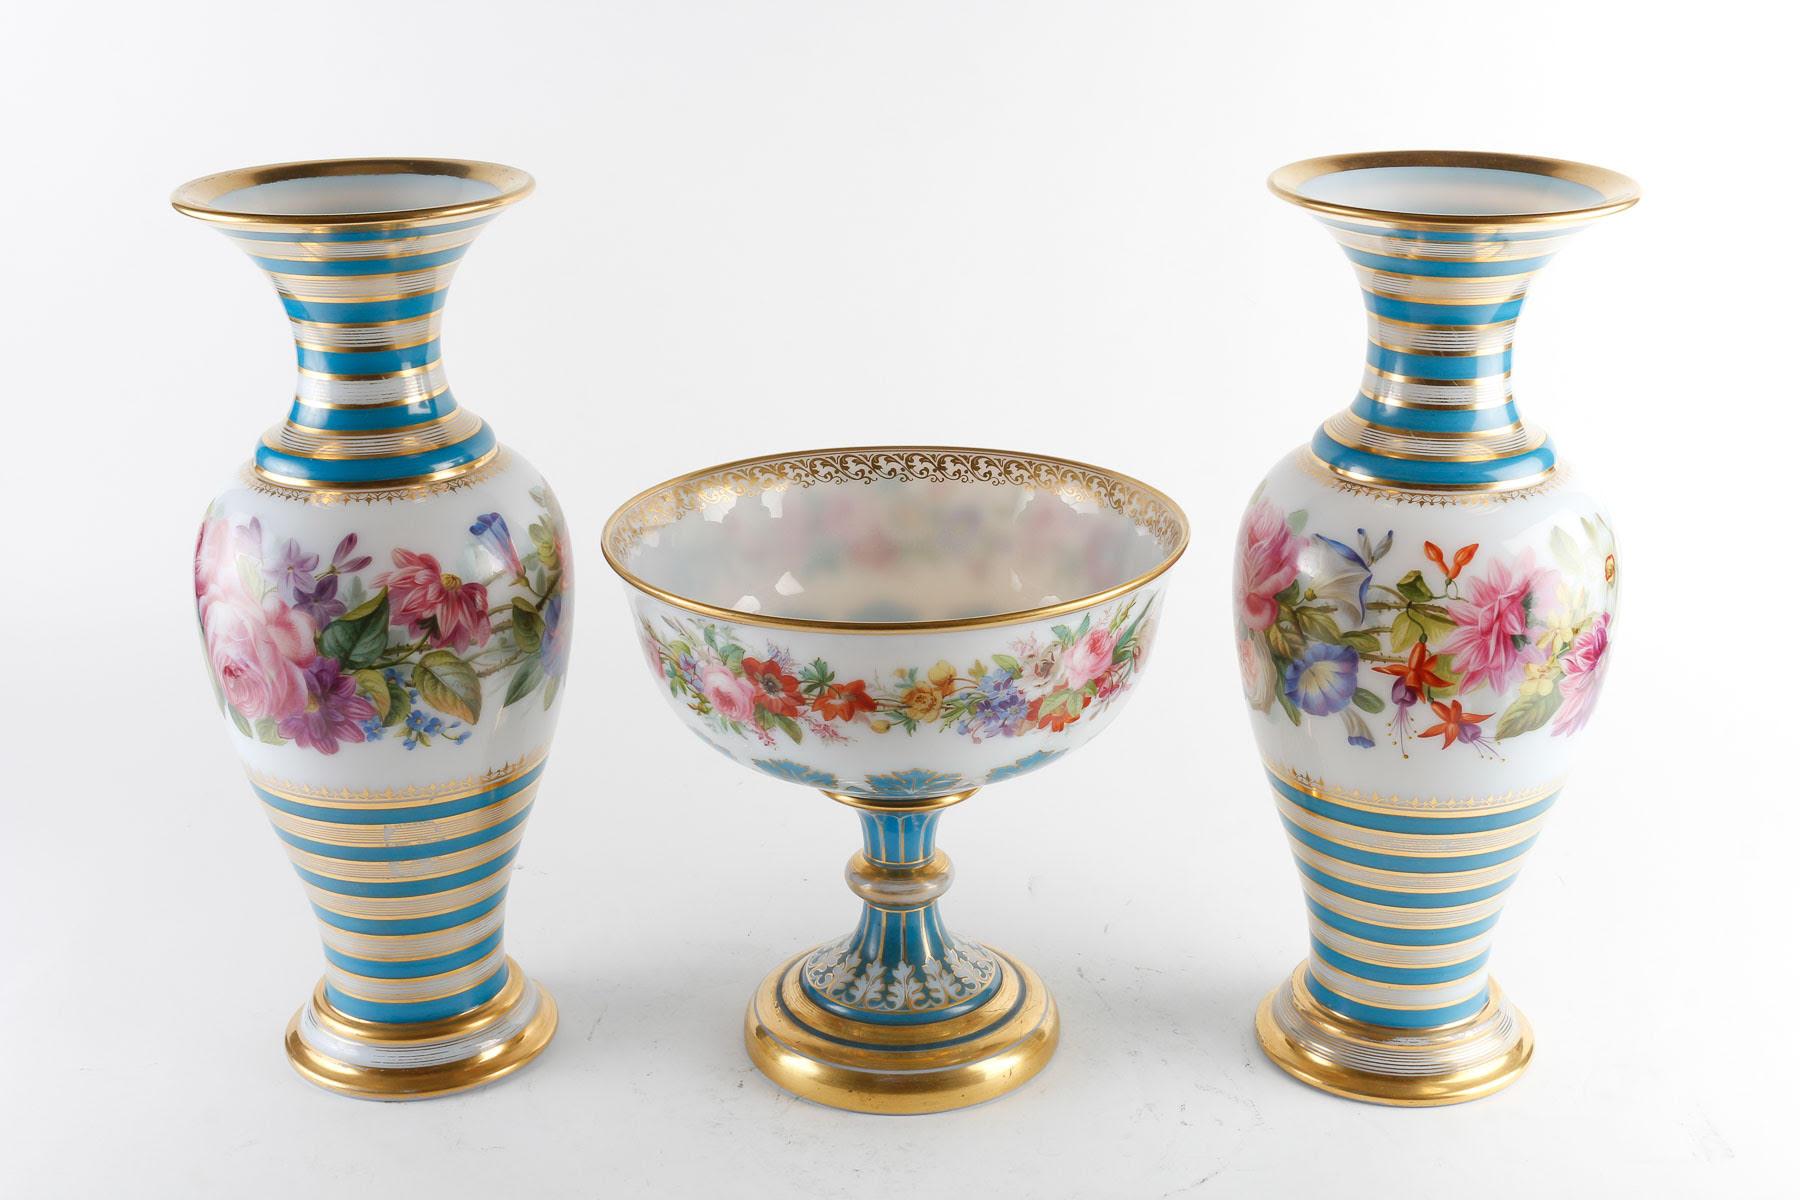 Important Set of a Pair of Vases and a Cup in Baccarat Opaline.

Set of a pair of Baccarat opaline vases and a Baccarat opaline cup, painted and enhanced with gold, 19th century, Napoleon III period.    

Cup: h: 25cm, d: 25cm
Vases: h: 40cm, d: 15cm